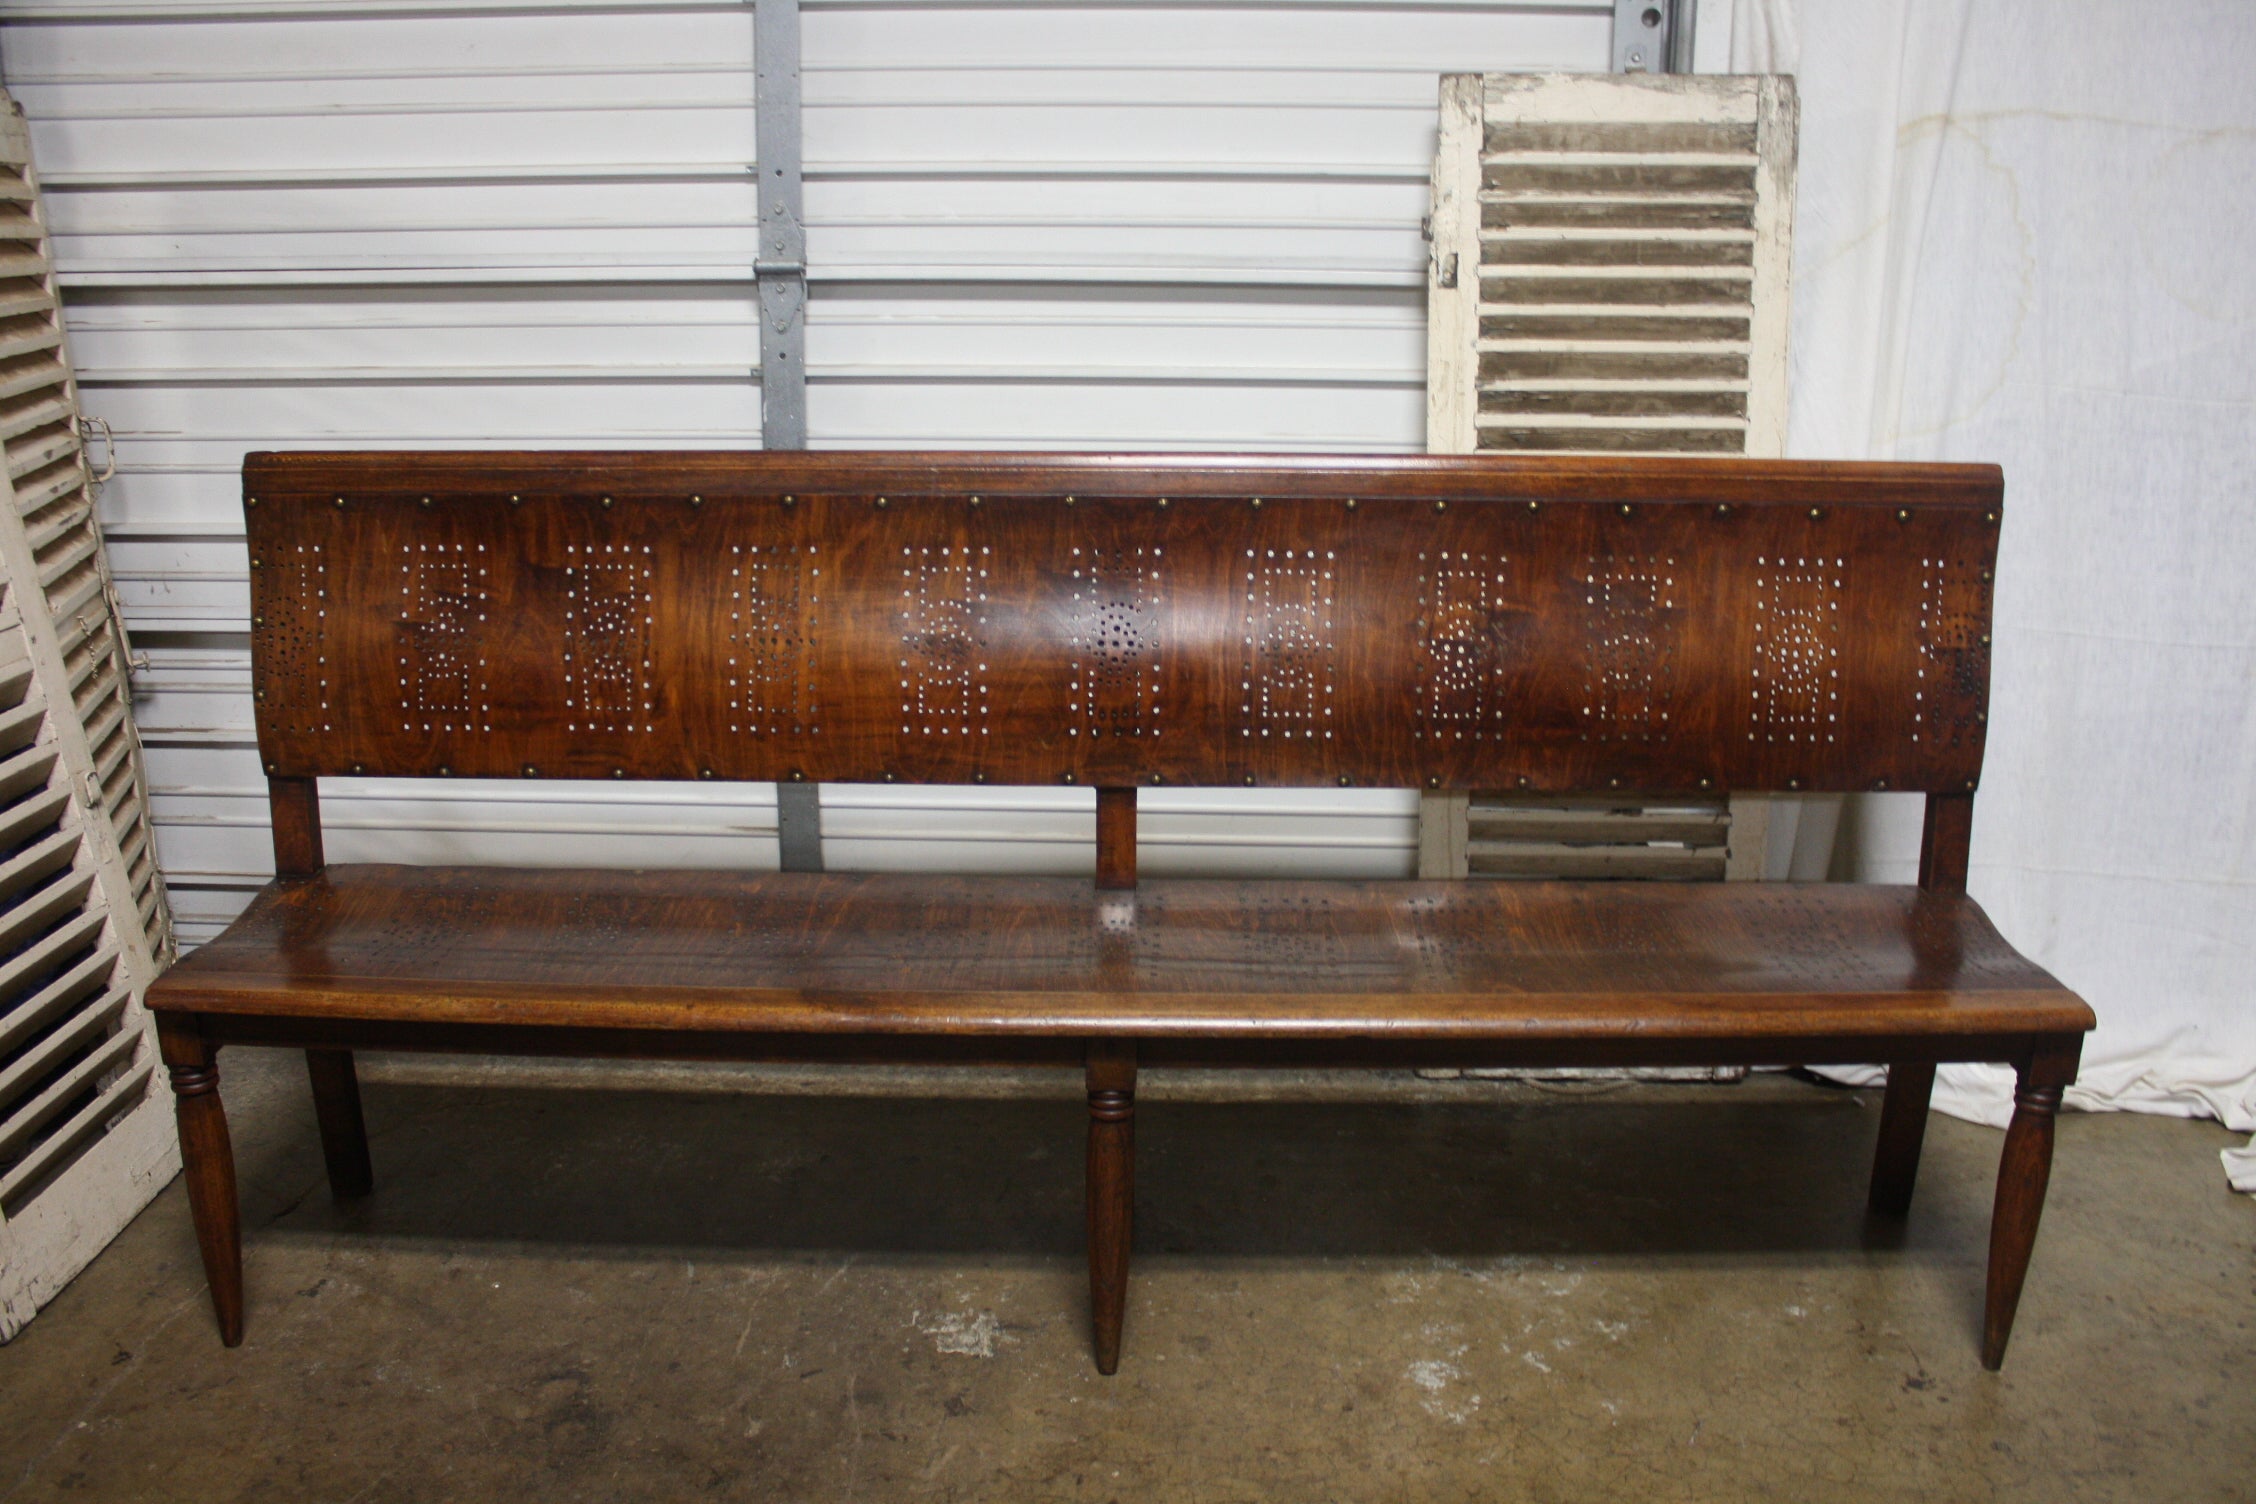 Beautiful design of this pool bench, nice warm color of the walnut and nice movement.